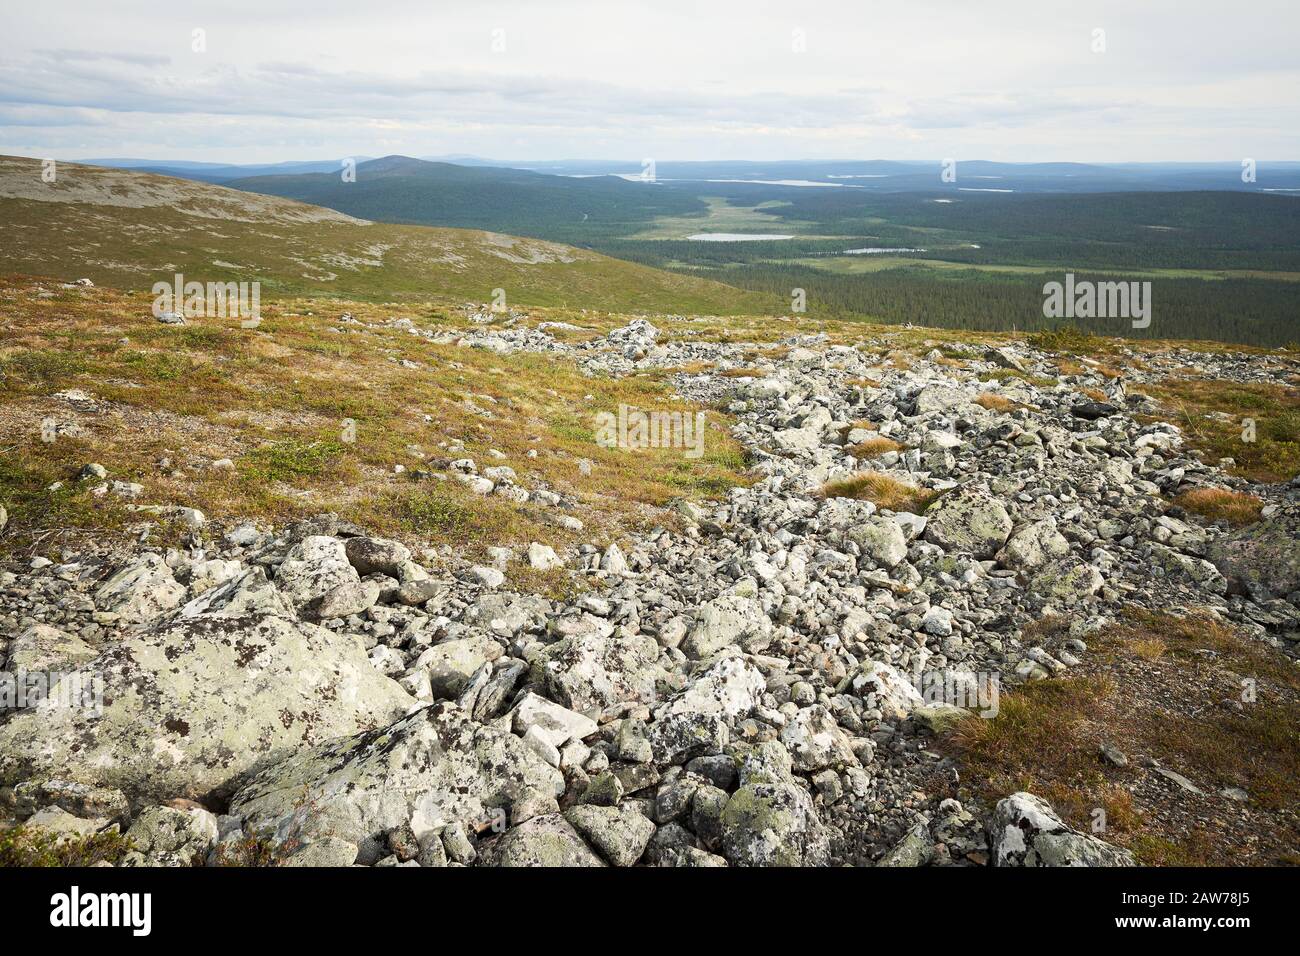 Beautiful panoramic view from a fell over forests, lakes and marshes of Lapland. Pallas-Yllastunturi National Park, Finland. Stock Photo